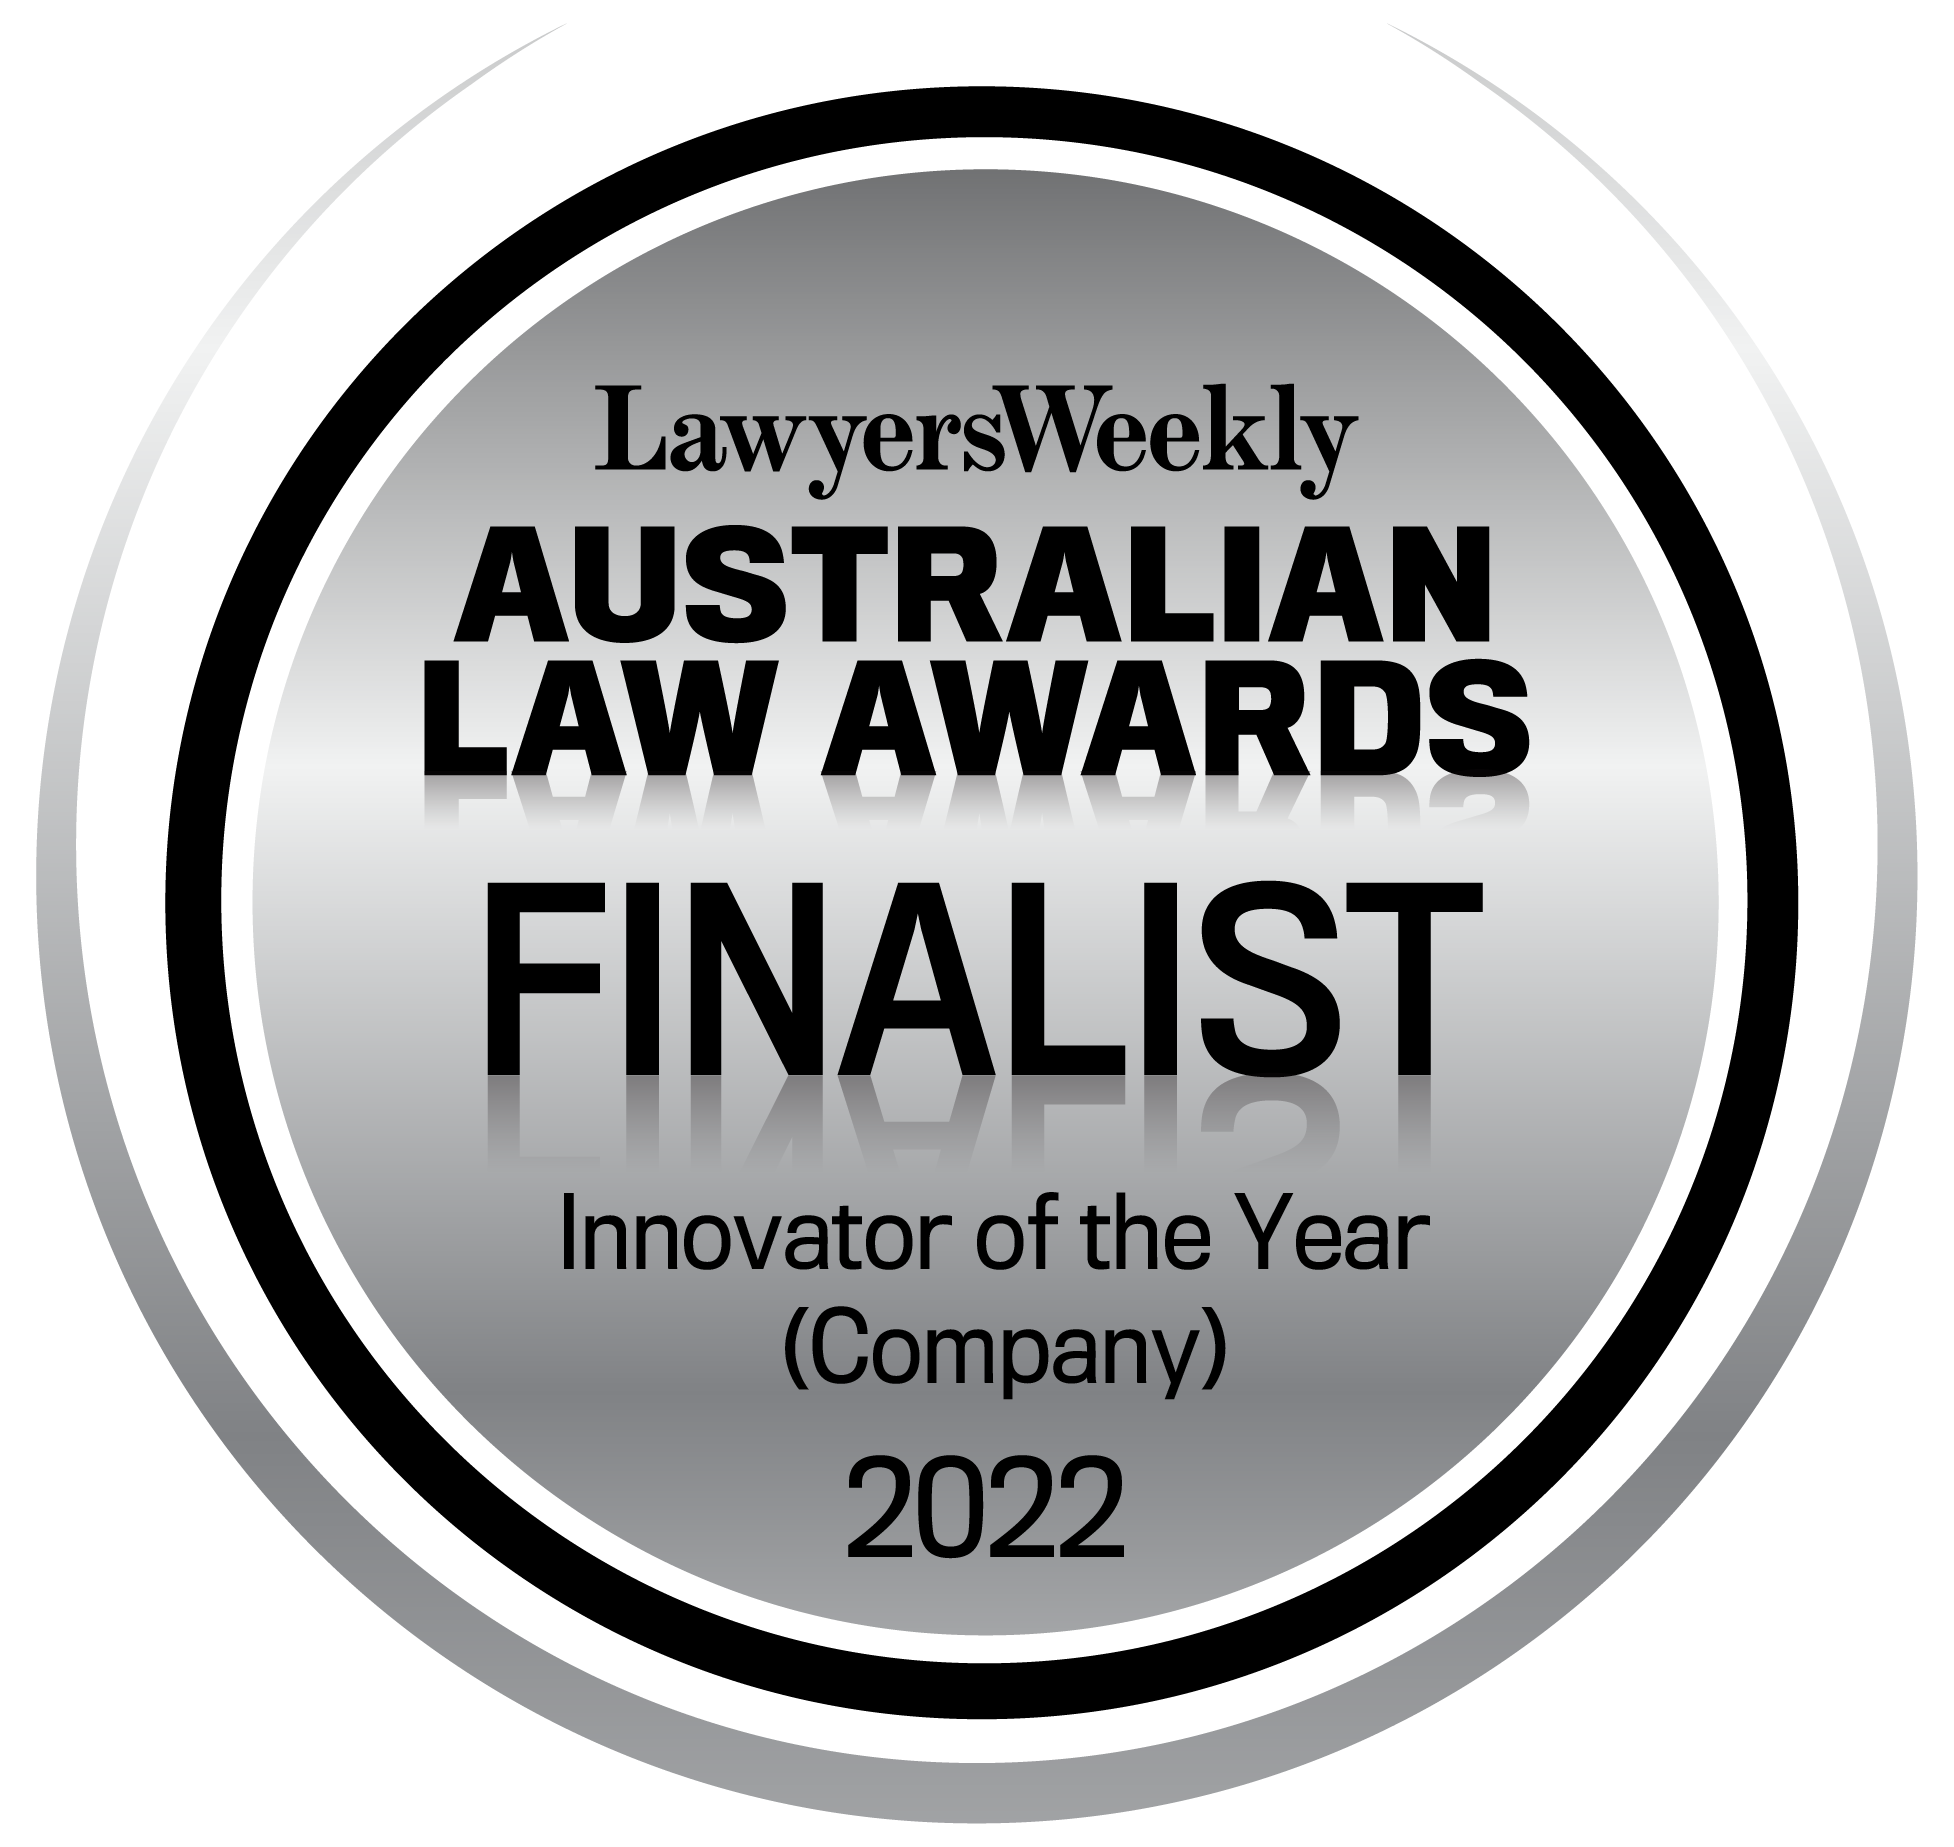 Medalion shaped graphic reading "Lawyers Weekly Australian Law Awards Finalist Innovator of the Year (Company) 2022